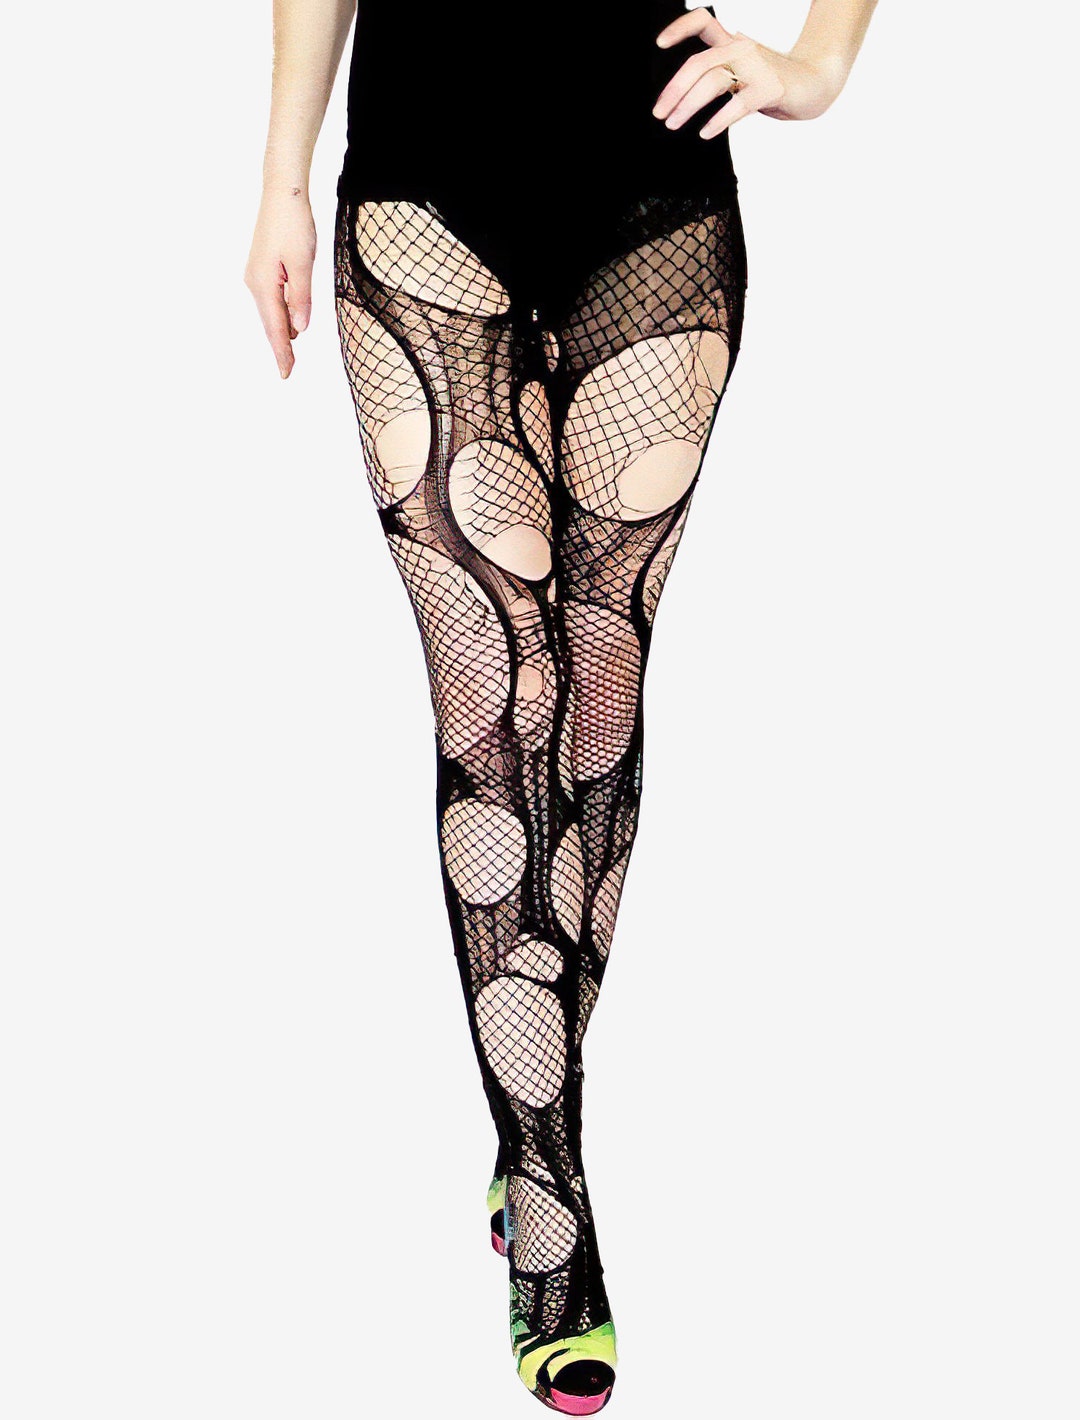 Accessorize Agoraphobix Double Layered Tattered & Torn Tights Fishnet  Leggings 